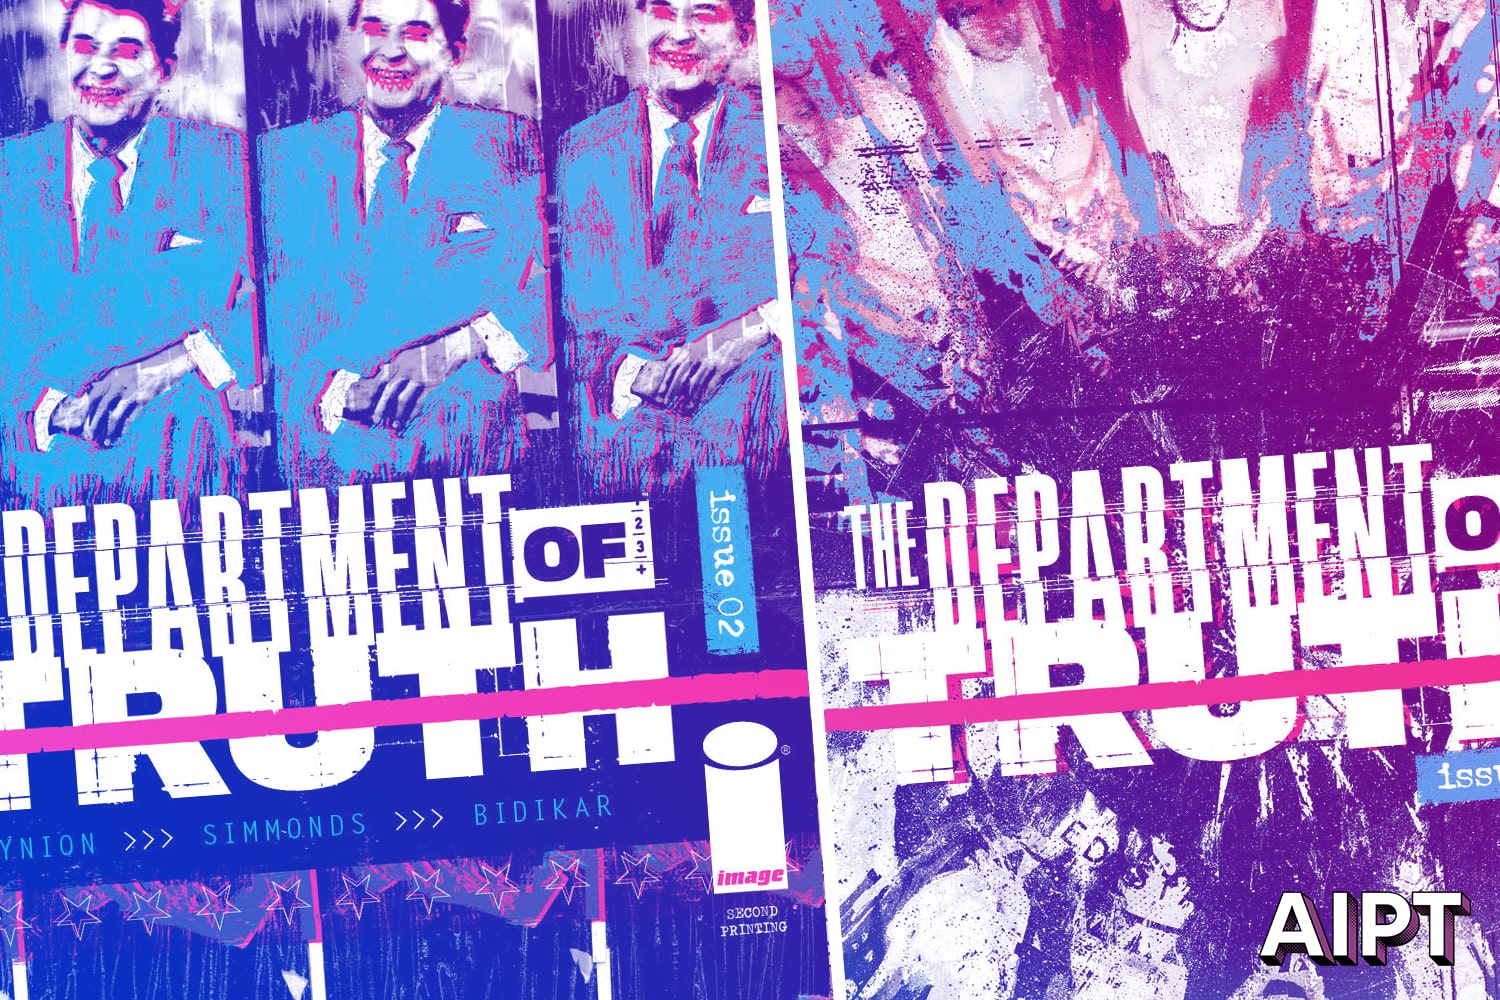 'The Department of Truth' #3 sells out and rushed back to print